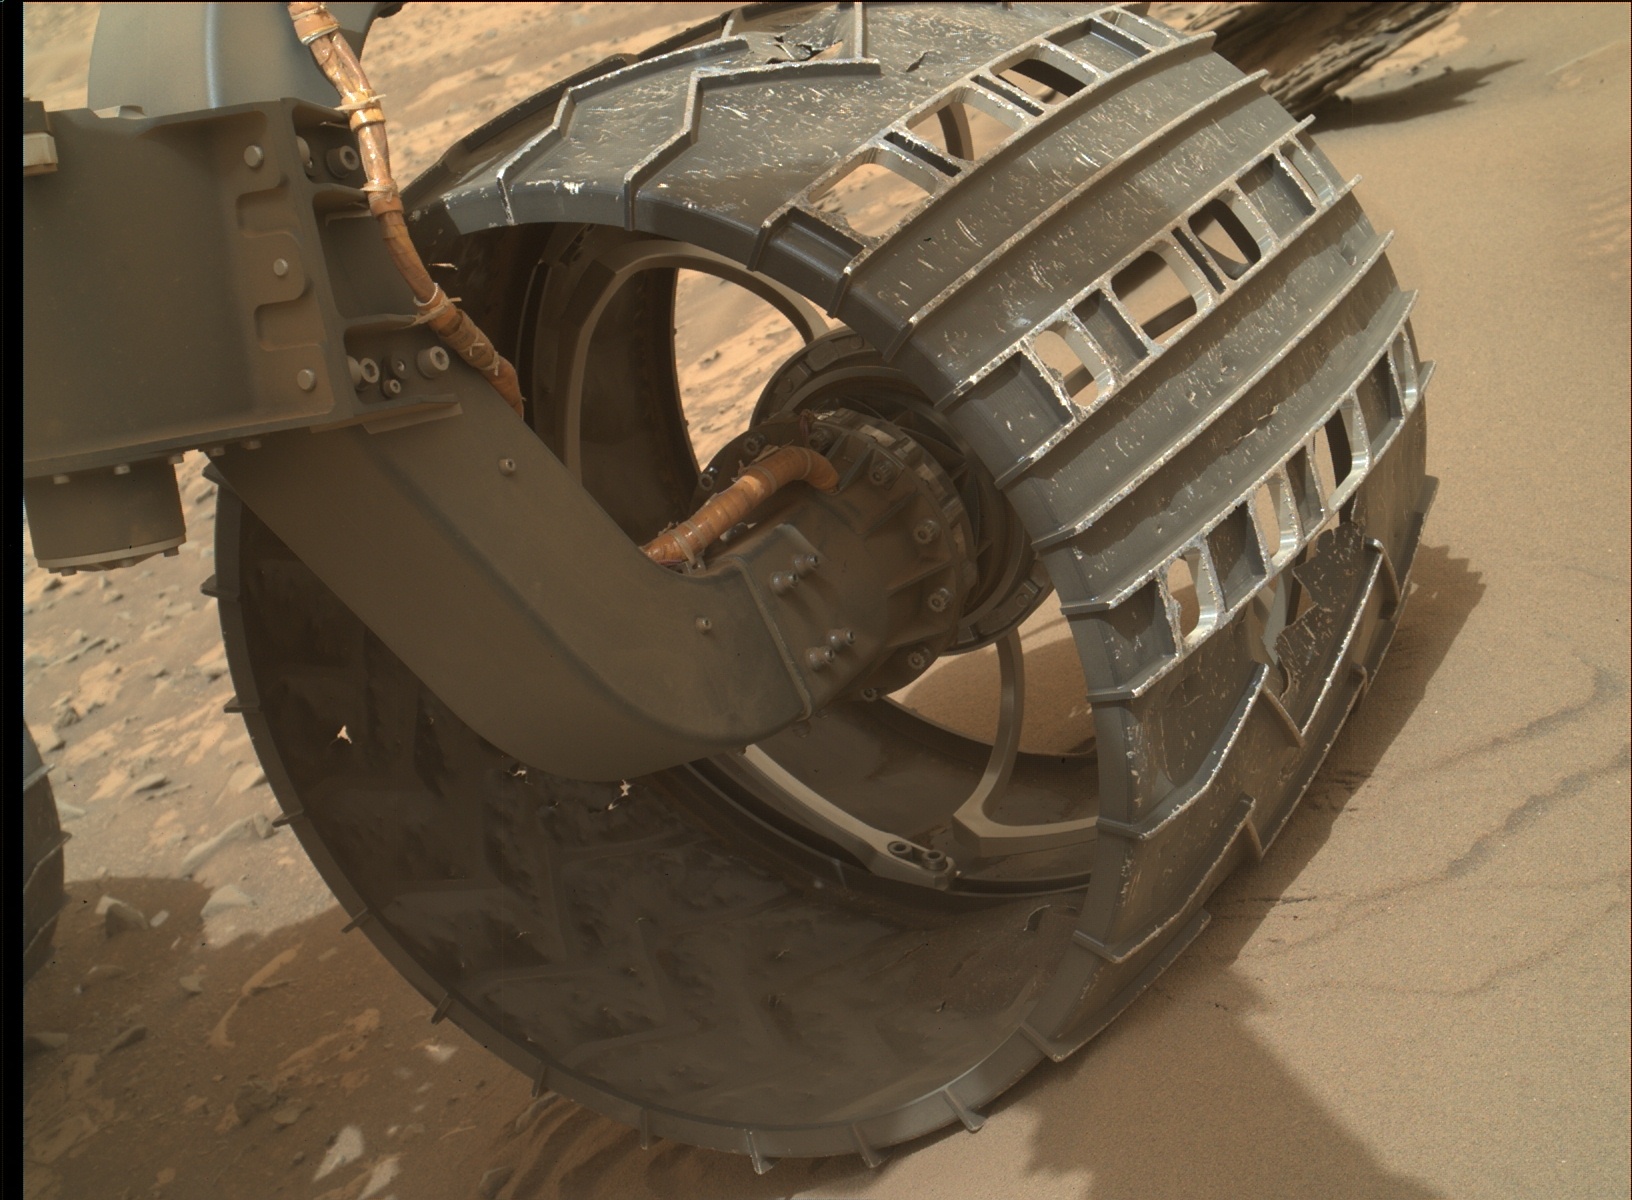 Nasa's Mars rover Curiosity acquired this image using its Mars Hand Lens Imager (MAHLI) on Sol 840